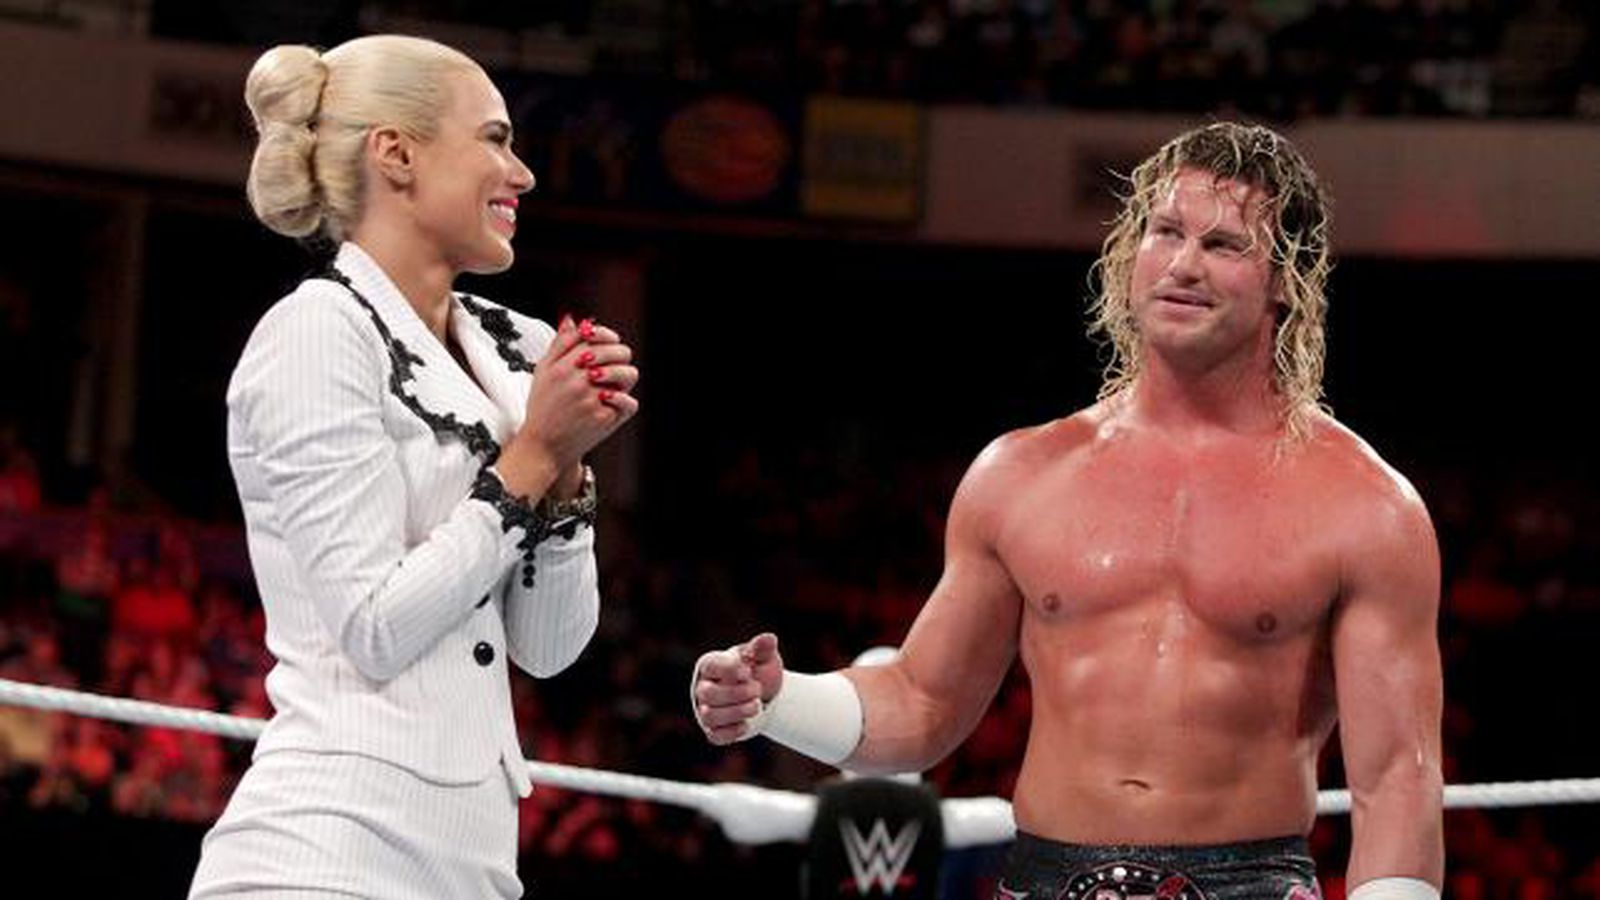 Here's a GIF from "Monday Night Raw" this week of...